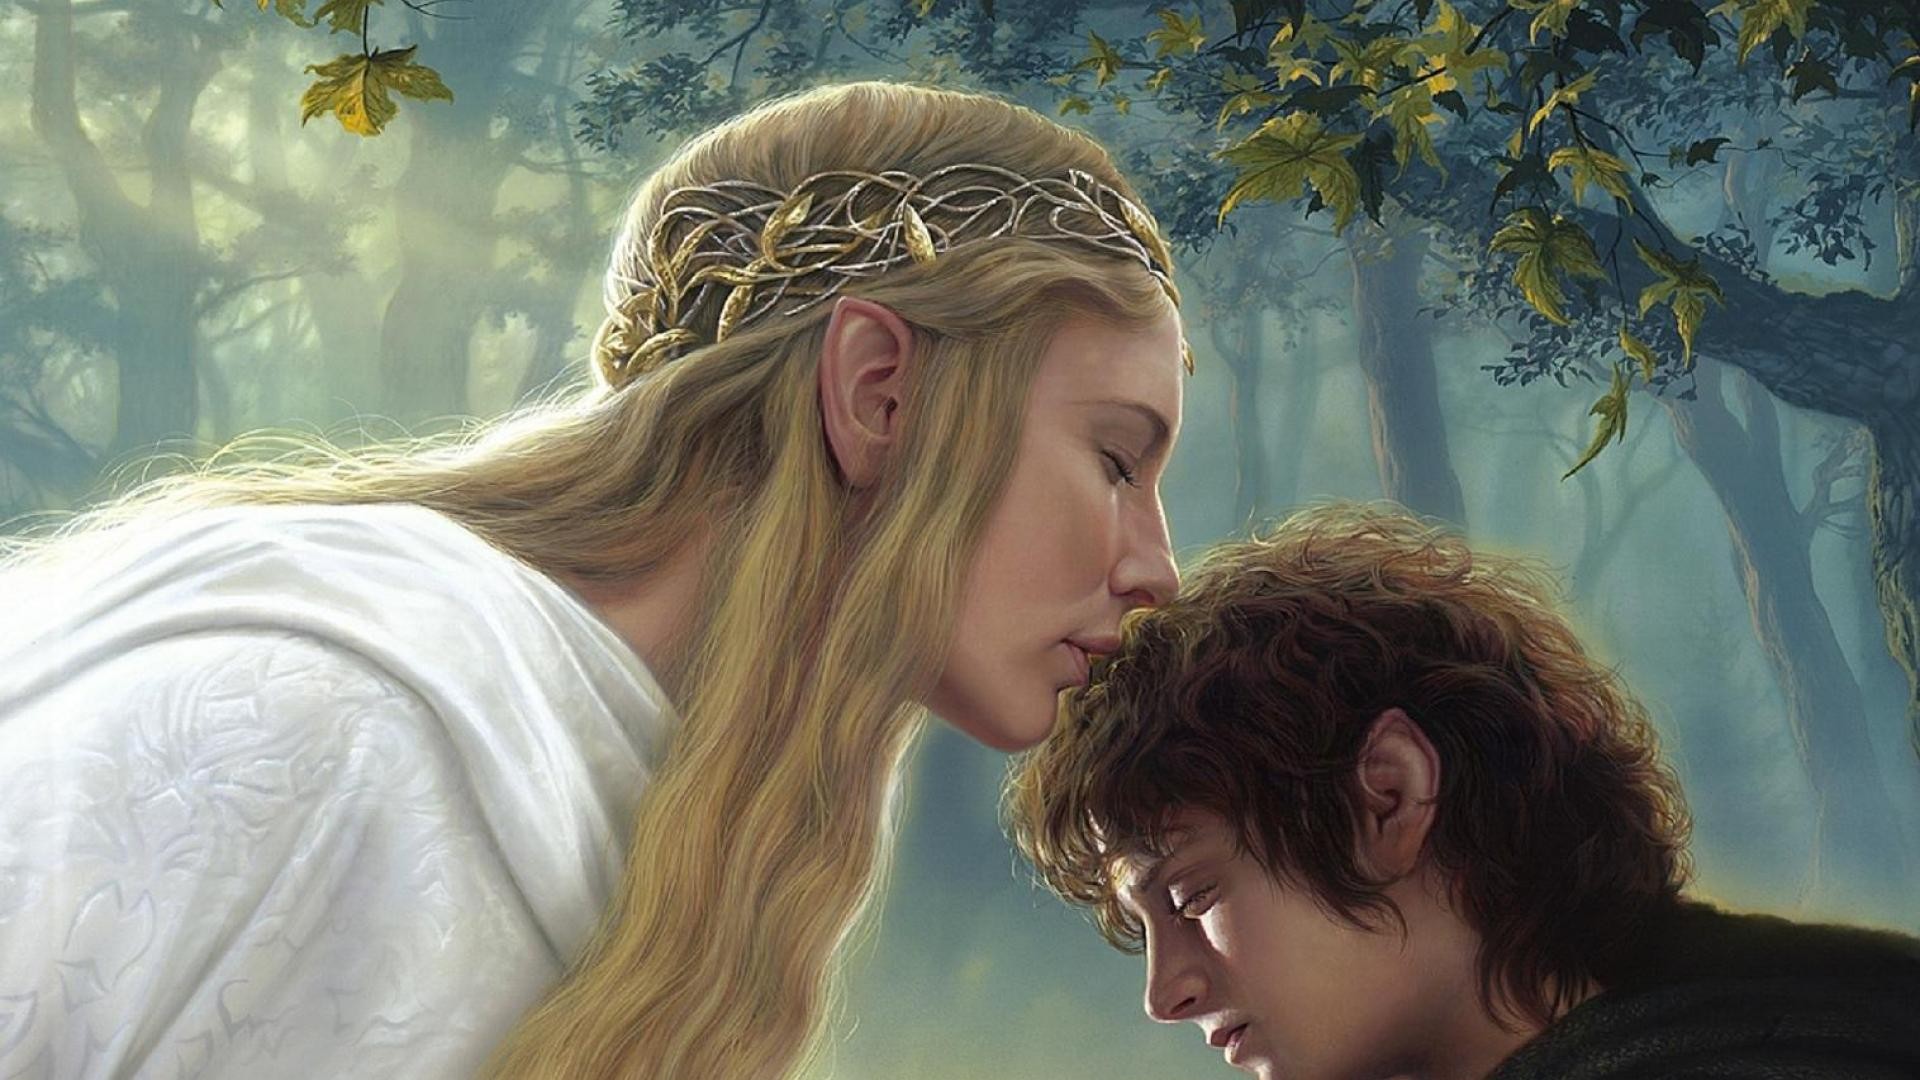 Fantasy Art Movies The Lord Of The Rings Galadriel Frodo Baggins 1920x1080